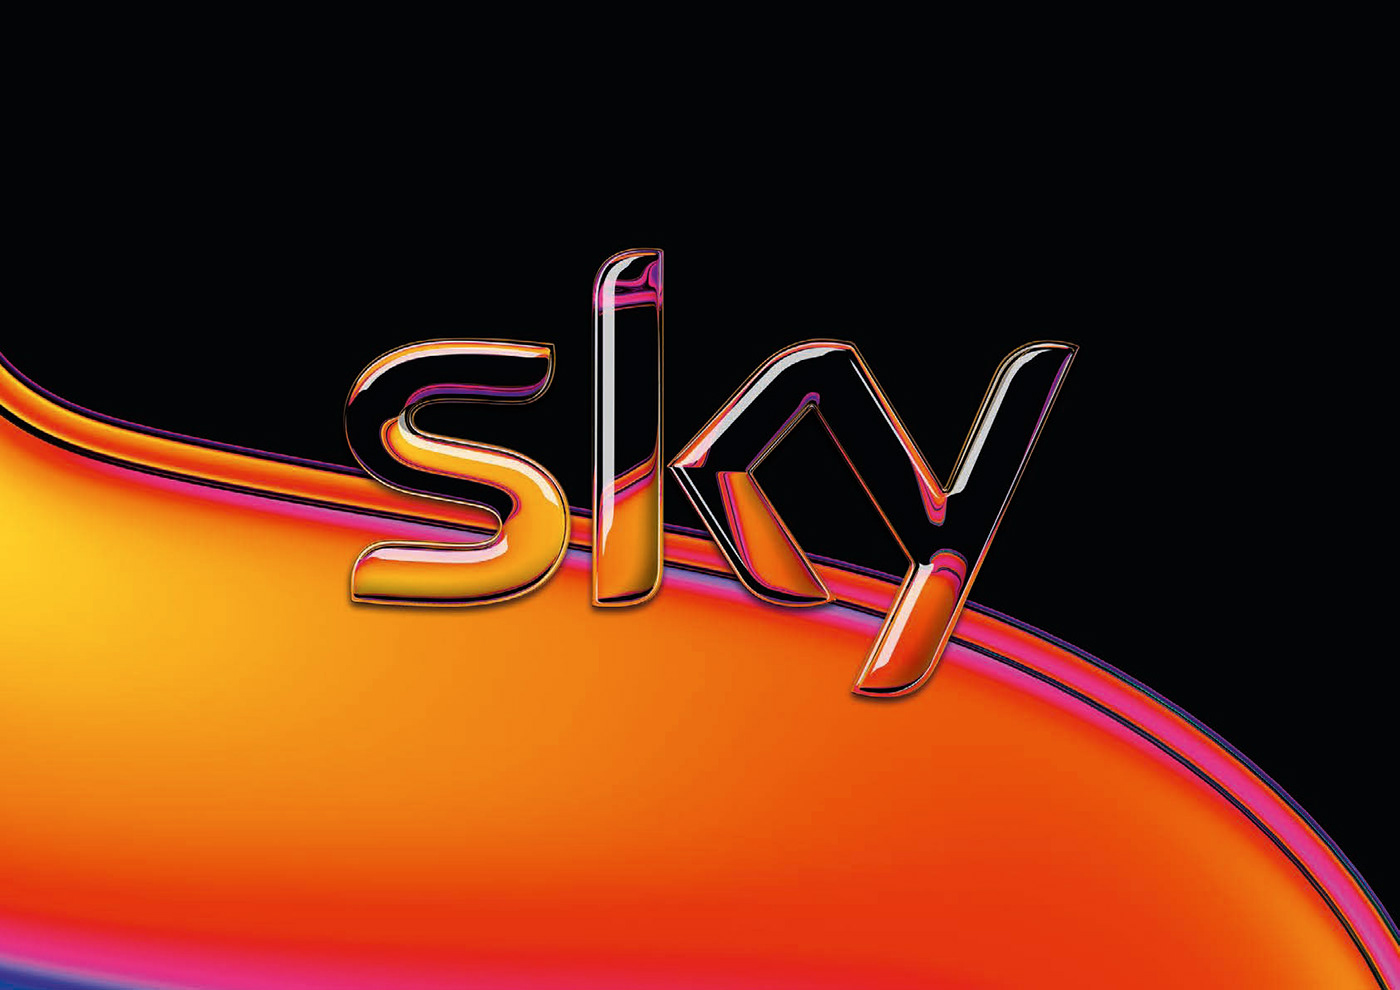 A logo for Sky, the UK's largest pay-tv broadcaster and telecommunications company. 